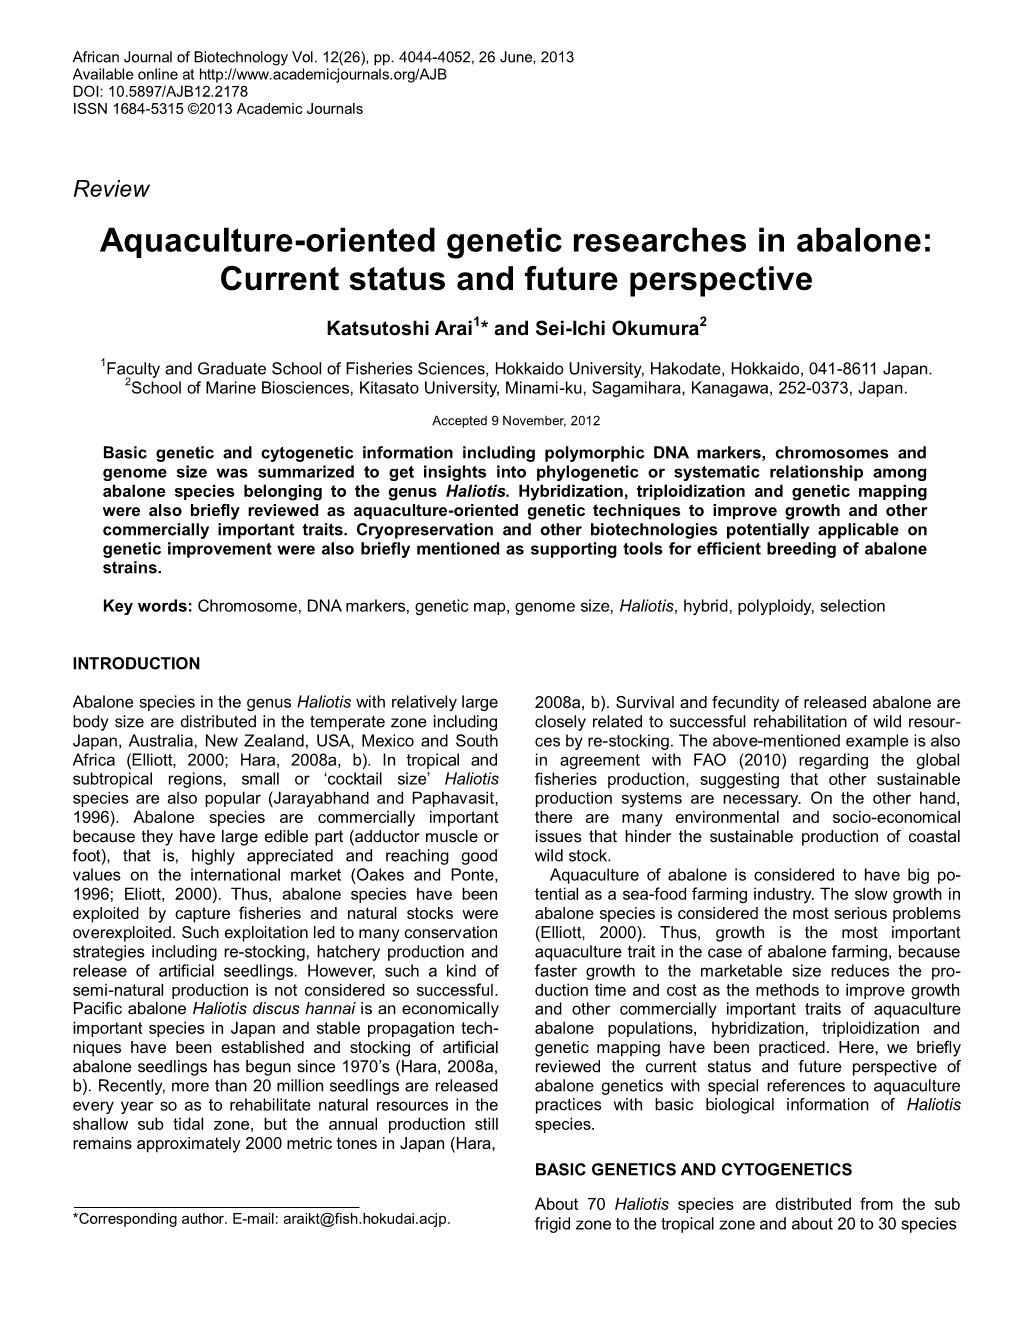 Aquaculture-Oriented Genetic Researches in Abalone: Current Status and Future Perspective